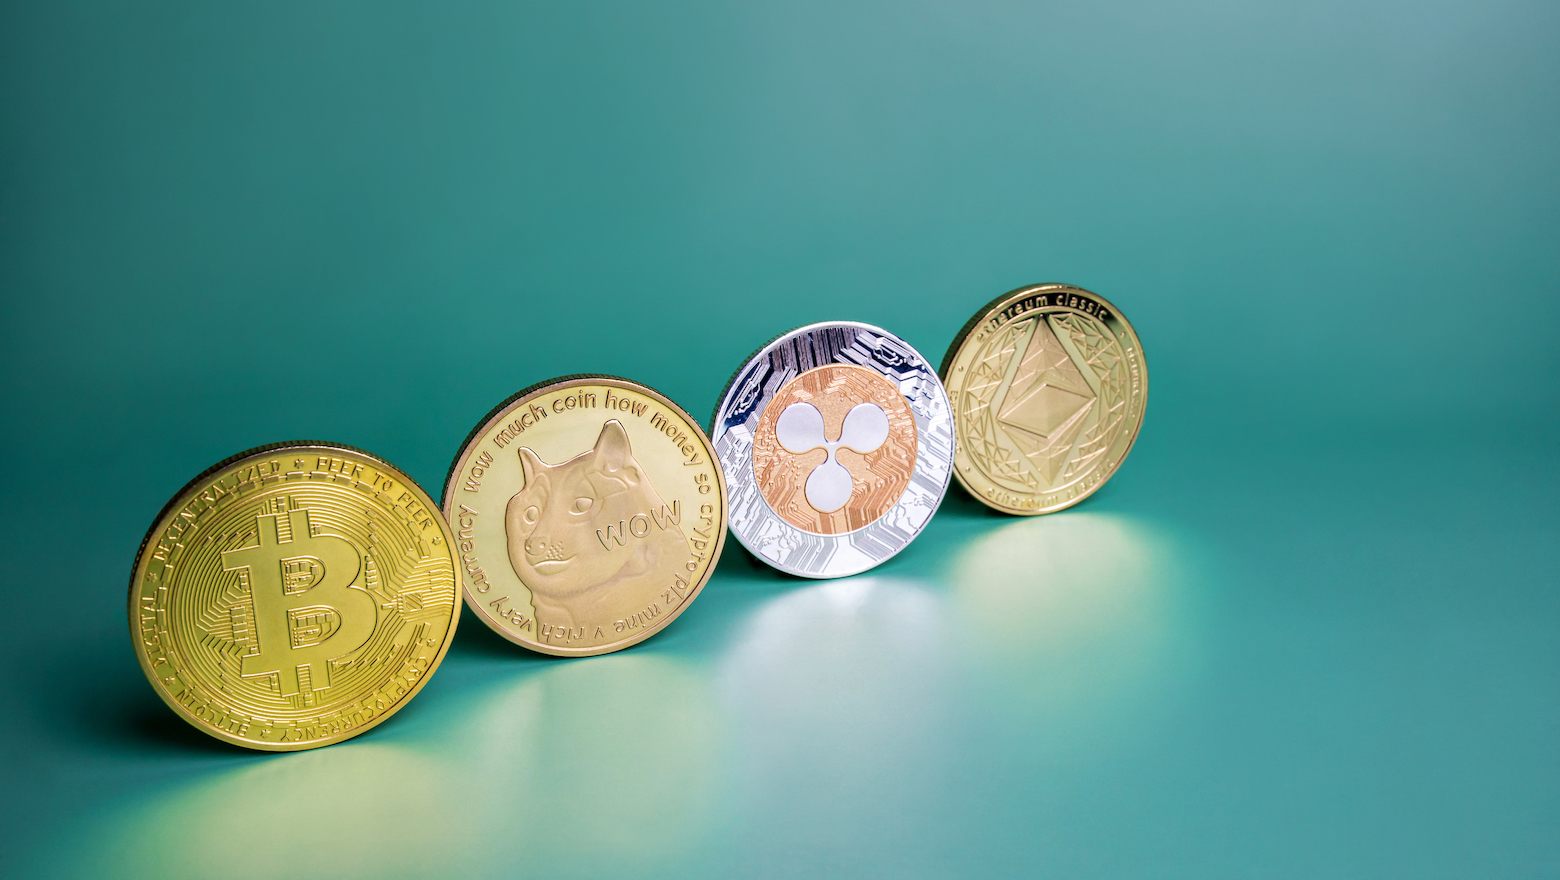 Digital Currency coins